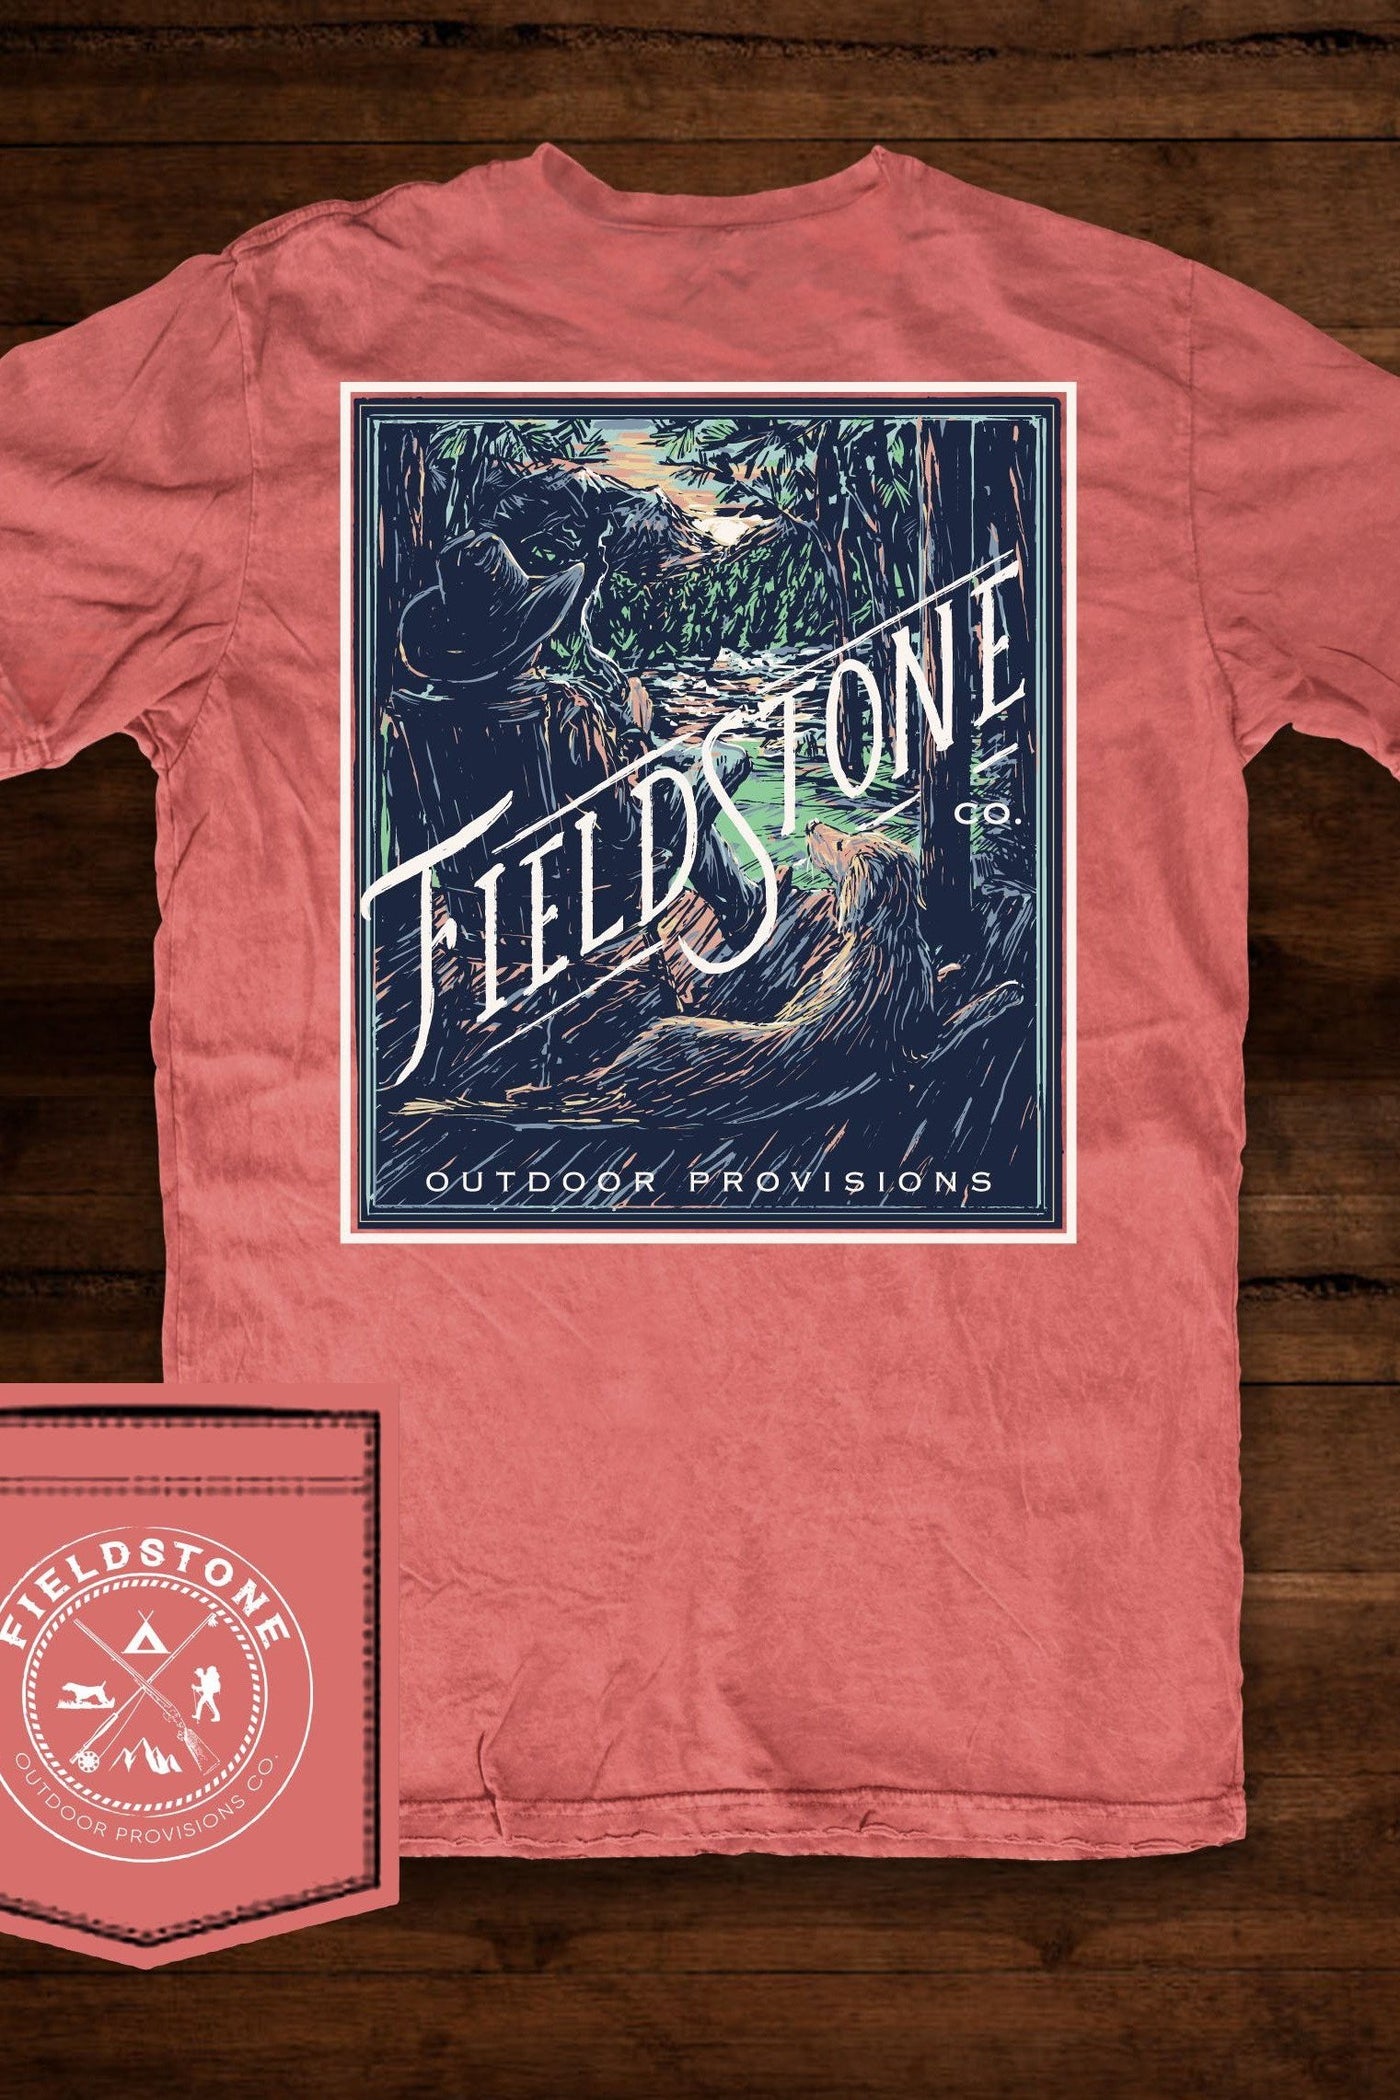 Relaxation Short Sleeve T-Shirt by Fieldstone Outdoors